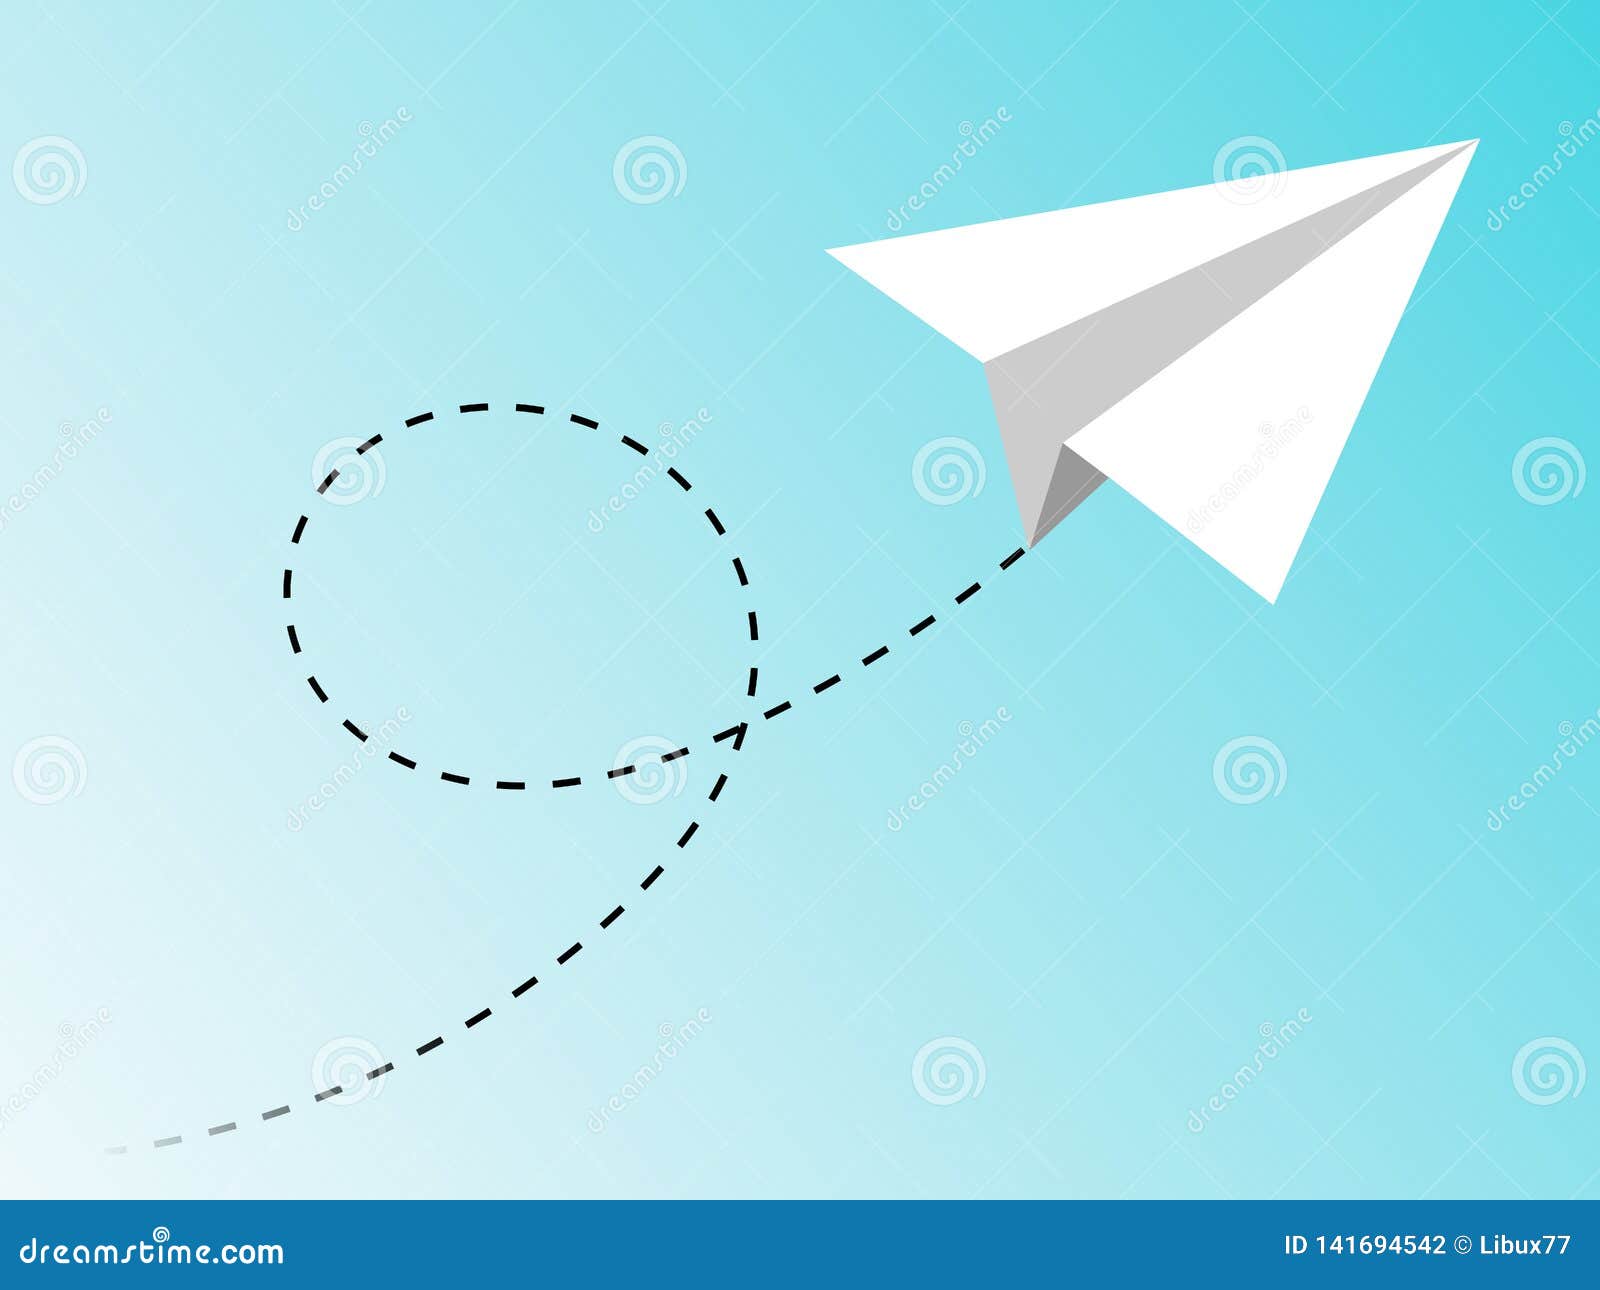 paper airplane flying trajectory in the blue sky. concept of travelling or of first or preliminary stage of project